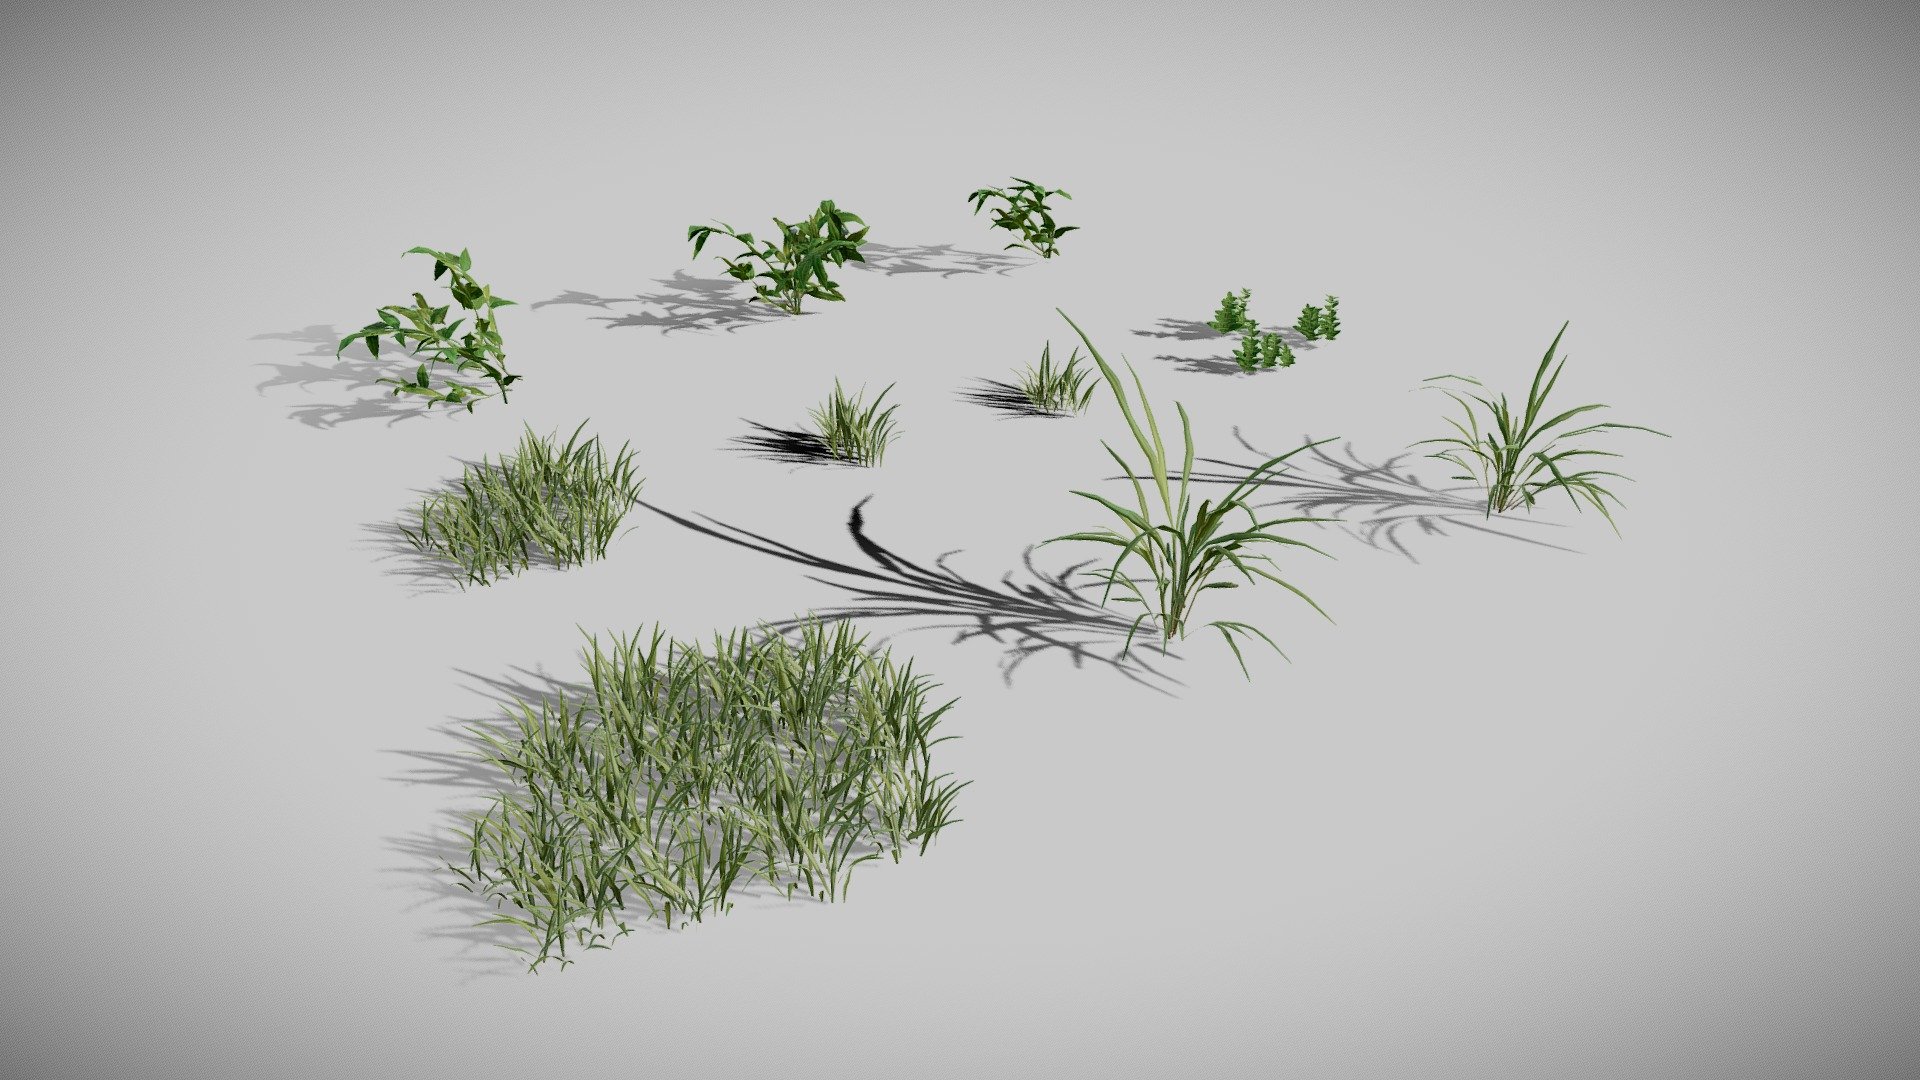 Details:

3D Formats:  You will get an obj, fbx and dae scene with all LOD0s and separate objects with LODs + Billboards (fbx and obj)

12 plants variations

2 Materials: Ground foliage and Billboard Foliage

4K textures: Base color ( .tif RGBA ), Normal, Roughness, Translucency, Opacity and Unity Thickness.

LODs + Billboards

Contact me for any issue or questions https://www.artstation.com/bpaul/profile - High Poly Ground Foliage - Buy Royalty Free 3D model by Paul (@nathan.d1563) 3d model